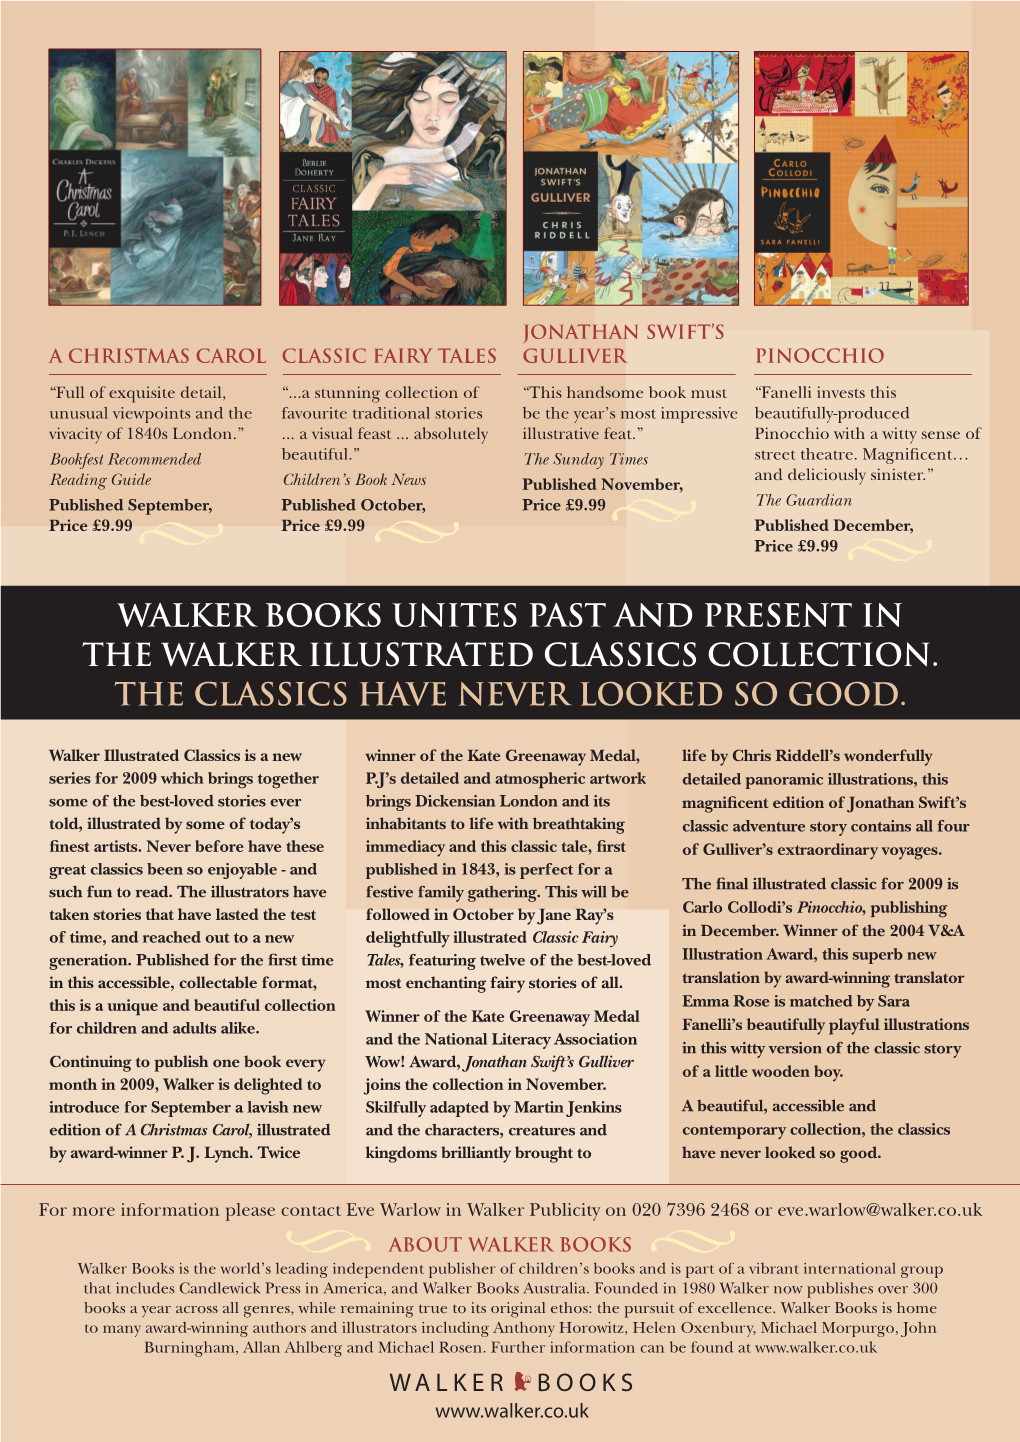 Walker Books Unites Past and Present in the Walker Illustrated Classics Collection. the Classics Have Never Looked So Good